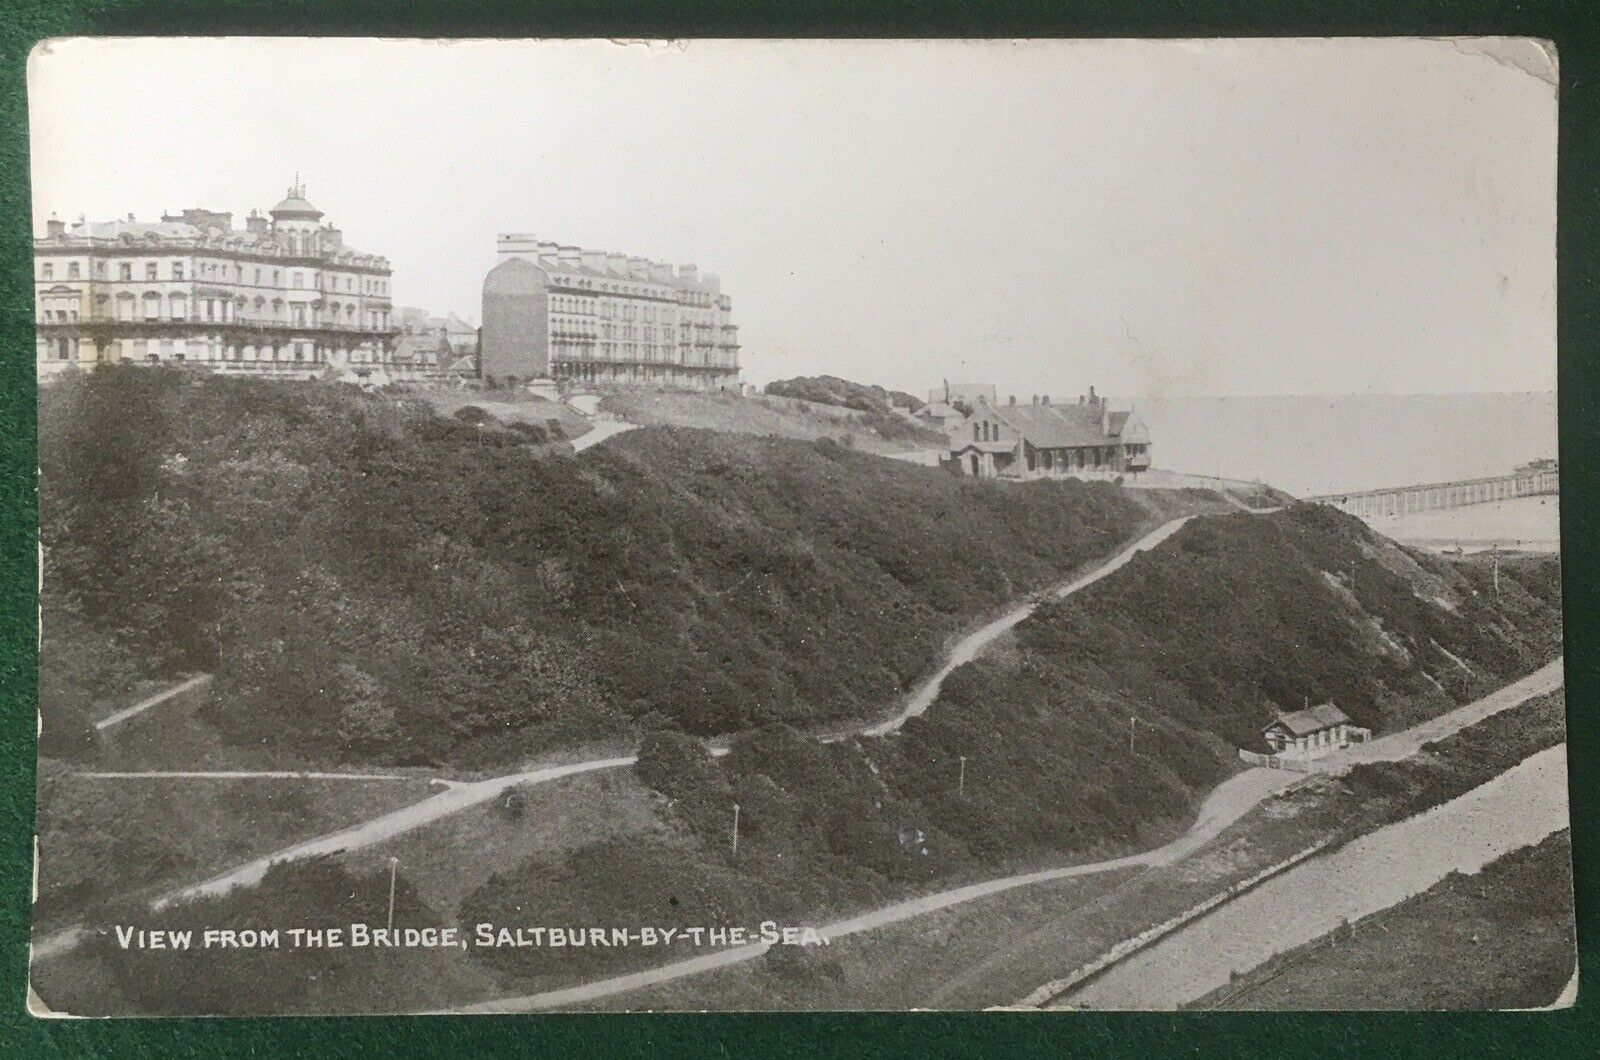 House Clearance - Saltburn-by-the Sea. Real Photo Card Franked C1910. Nice view of the bridge